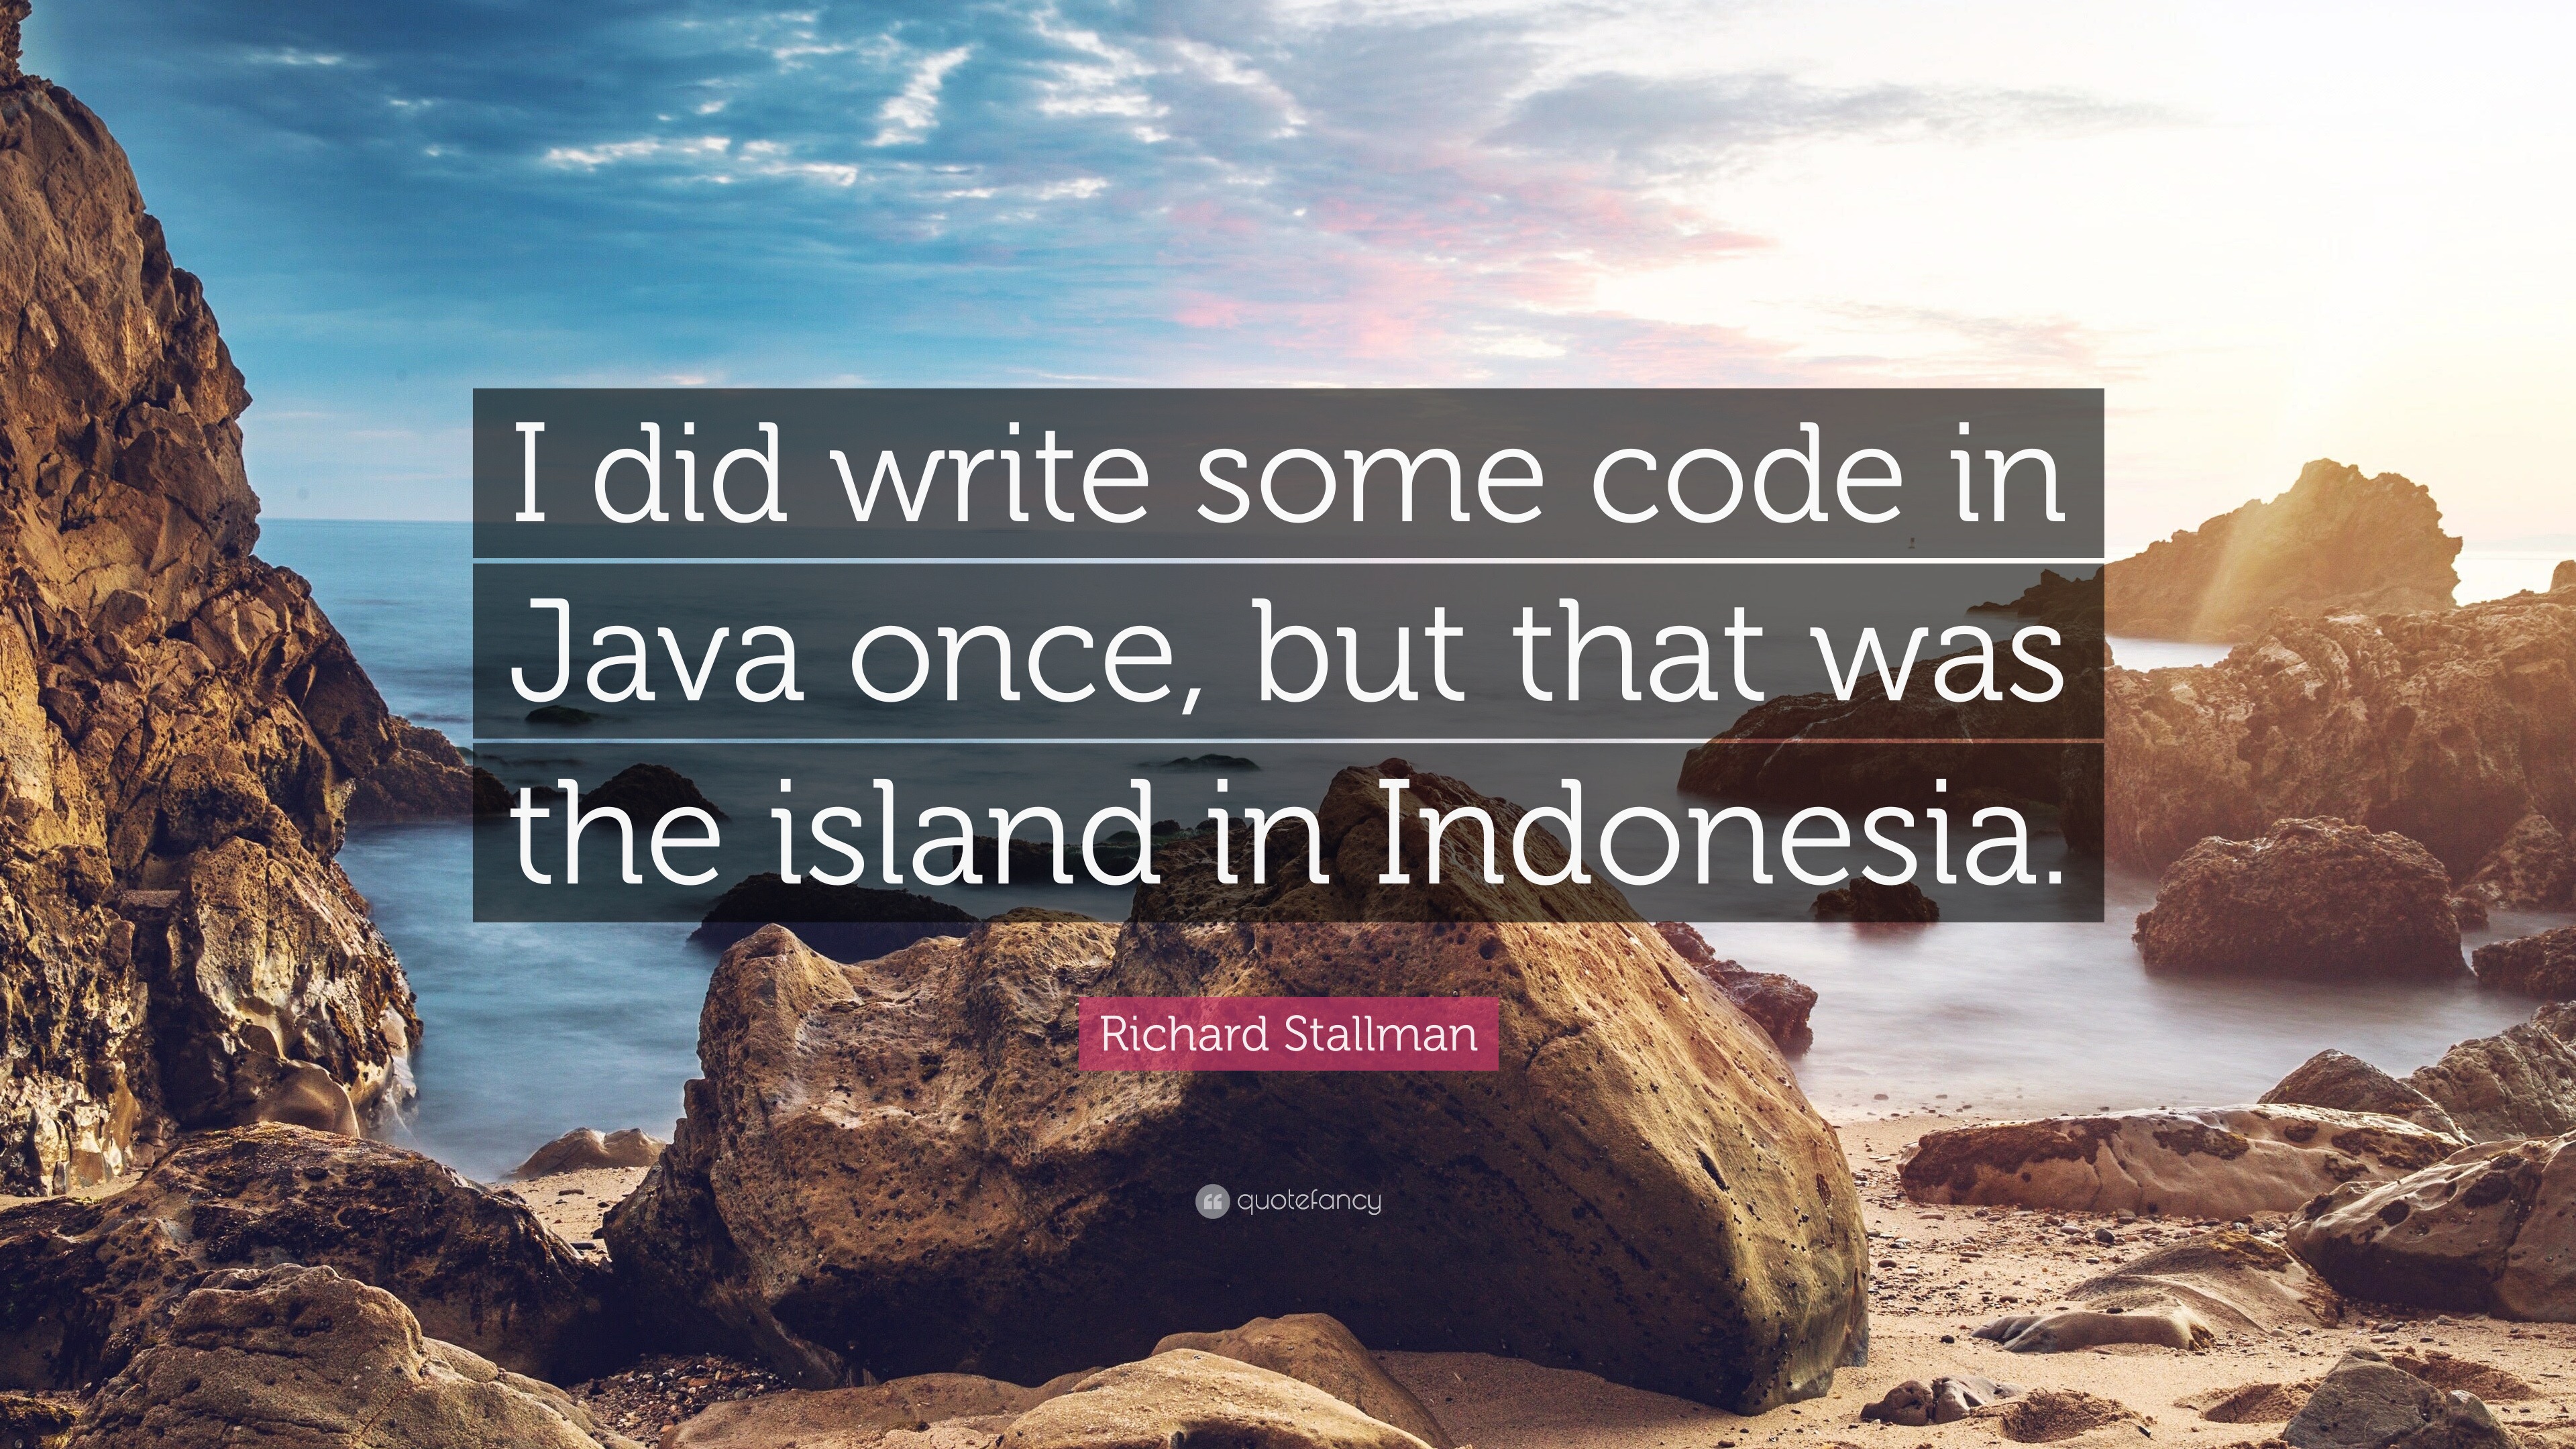 Richard Stallman Quote: “I did write some code in Java once, but that